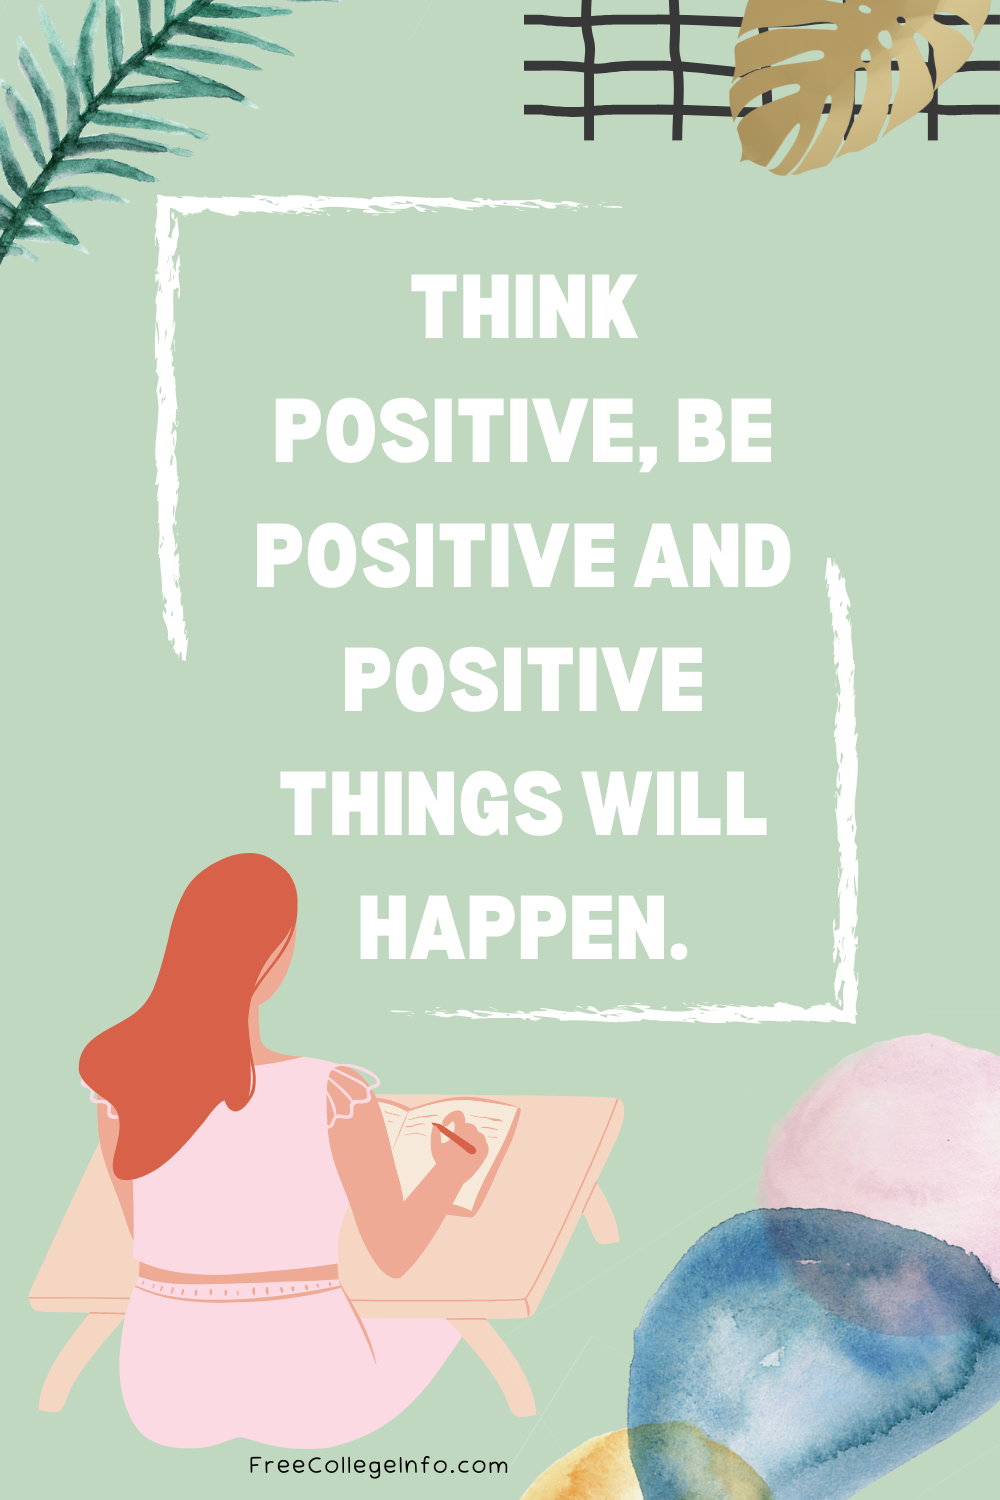 Think positive, be positive and positive things will happen.